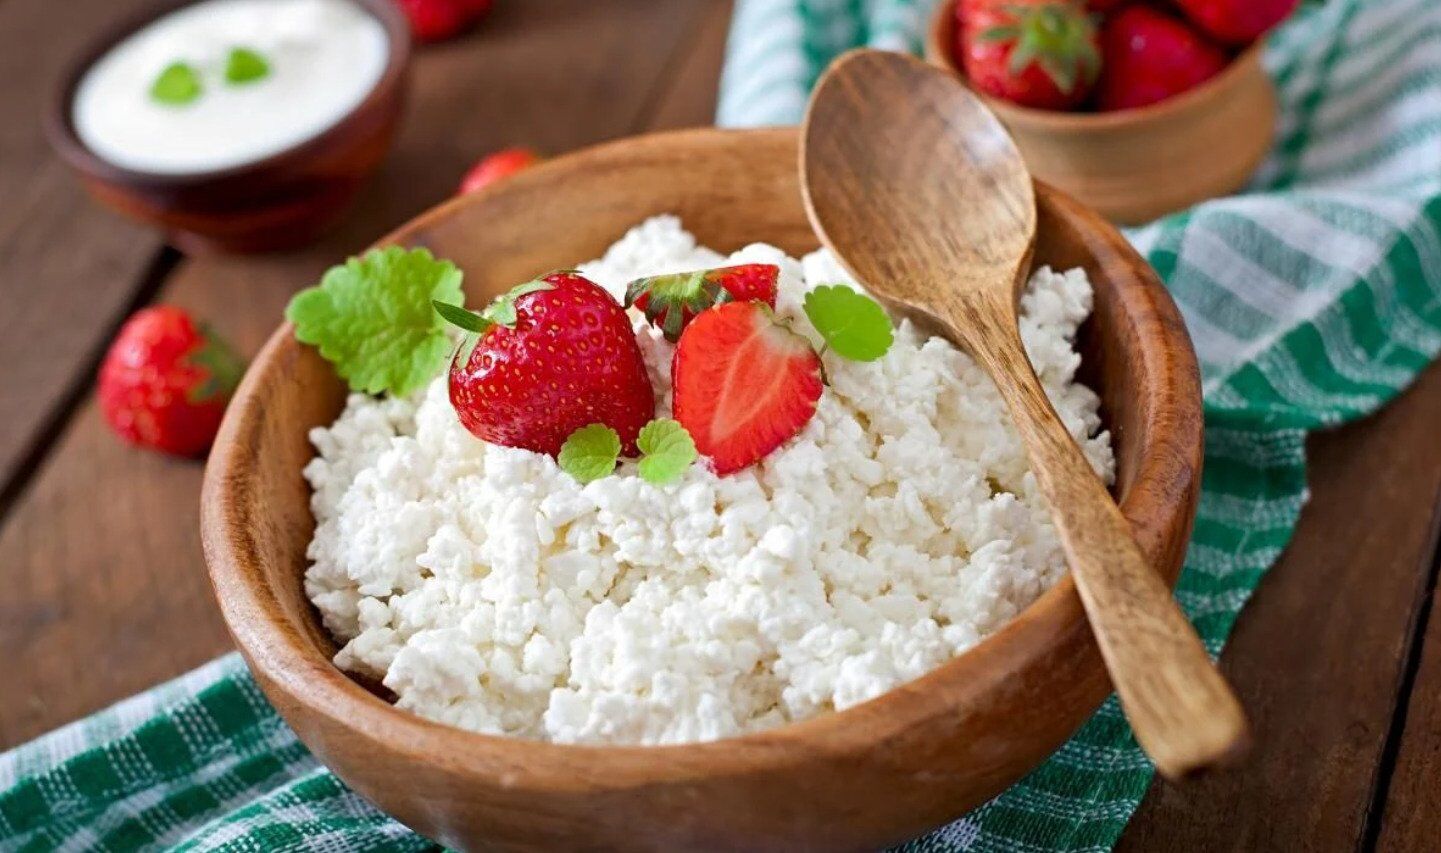 Do not combine cottage cheese with these foods: the dish will be harmful